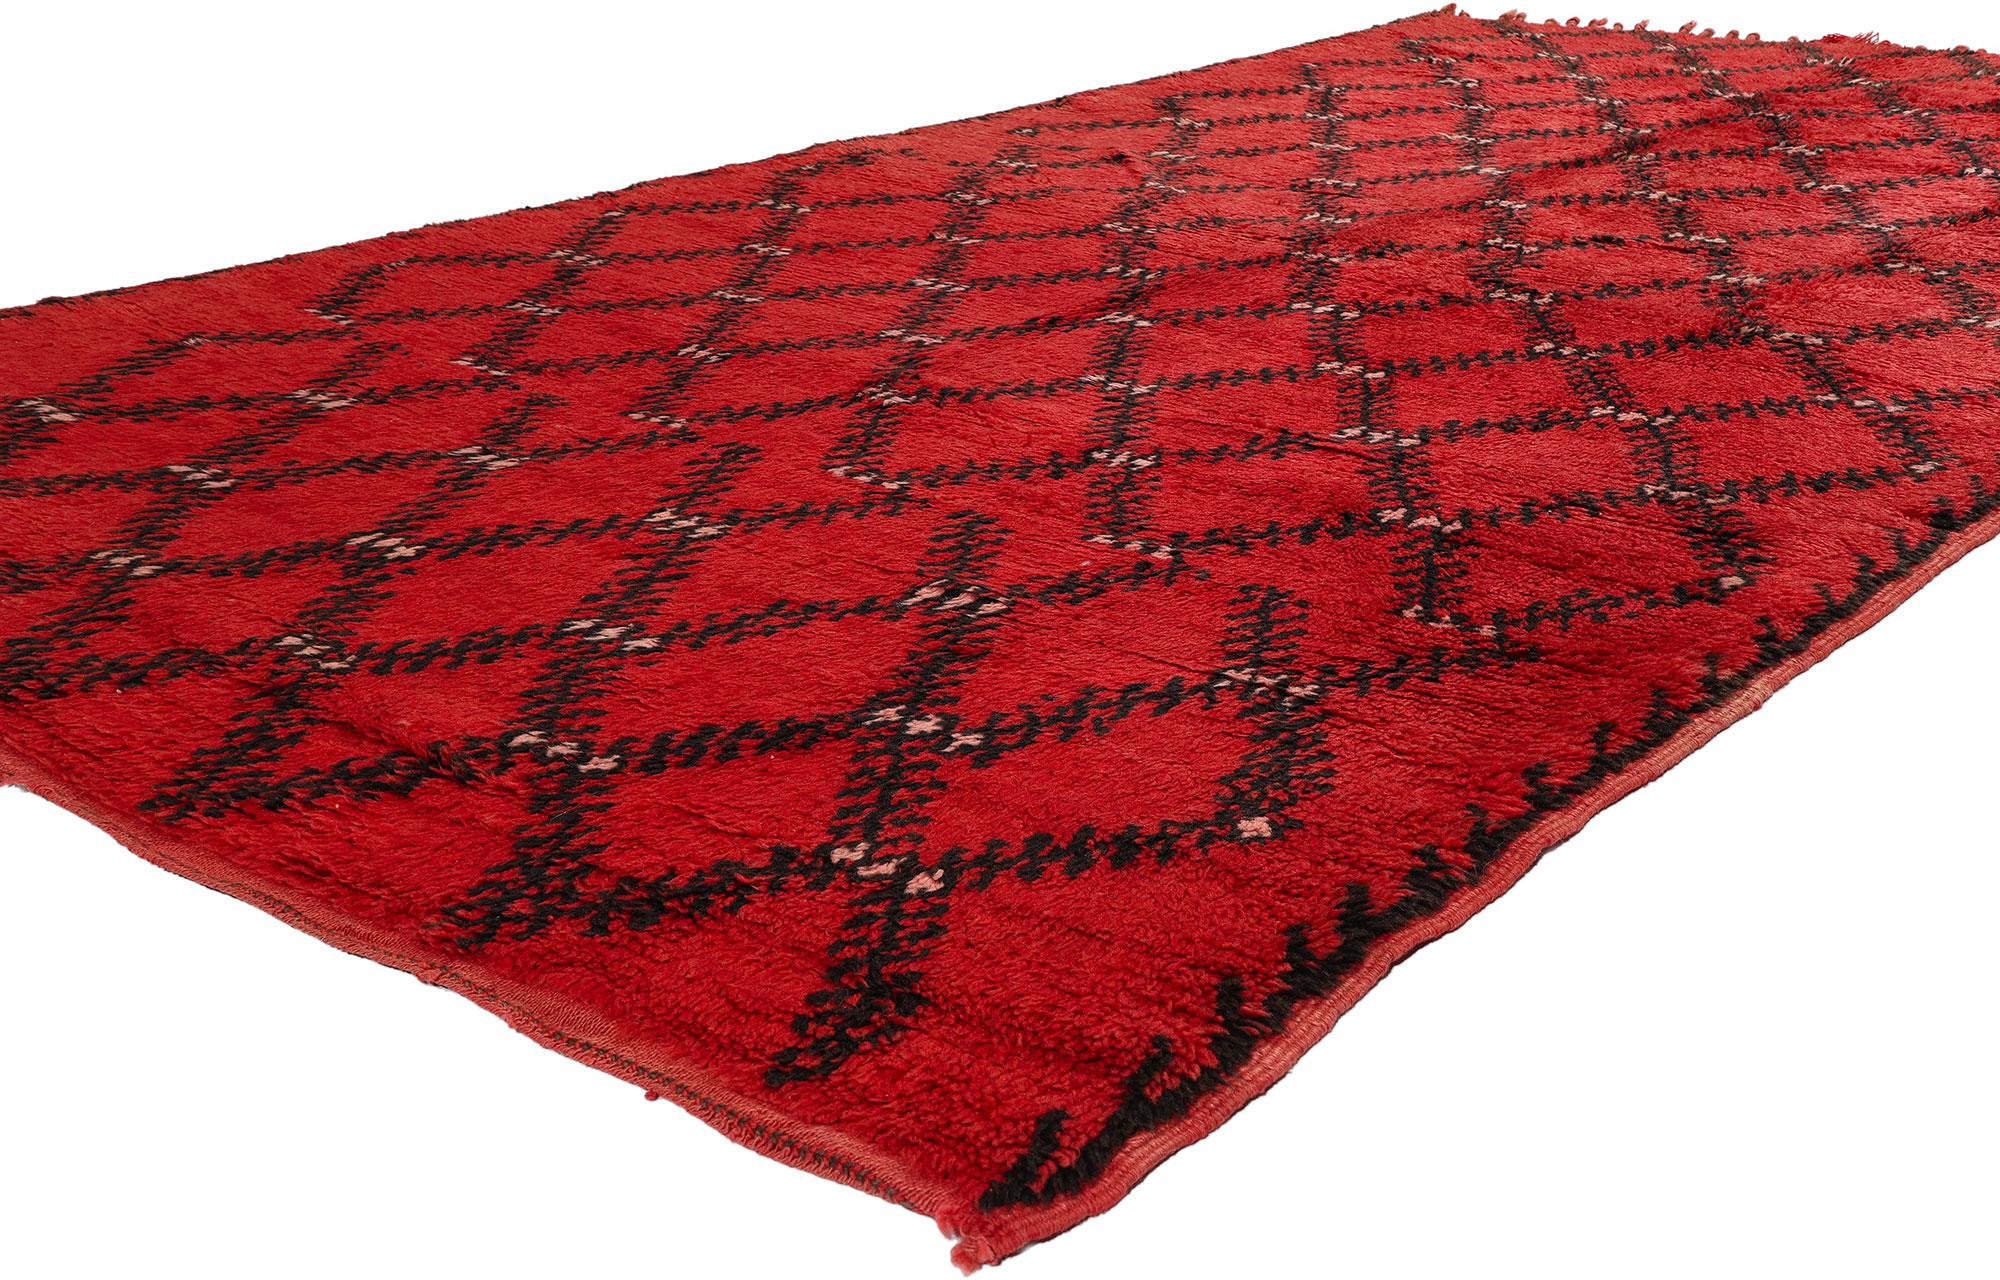 21731 Vintage Red Beni Mrirt Moroccan Rug, 05'06 x 09'11. Beni Mrirt rugs embody the treasured tradition of Moroccan weaving, celebrated for their luxurious texture, geometric designs, and calming earthy tones. Handcrafted by skilled artisans of the